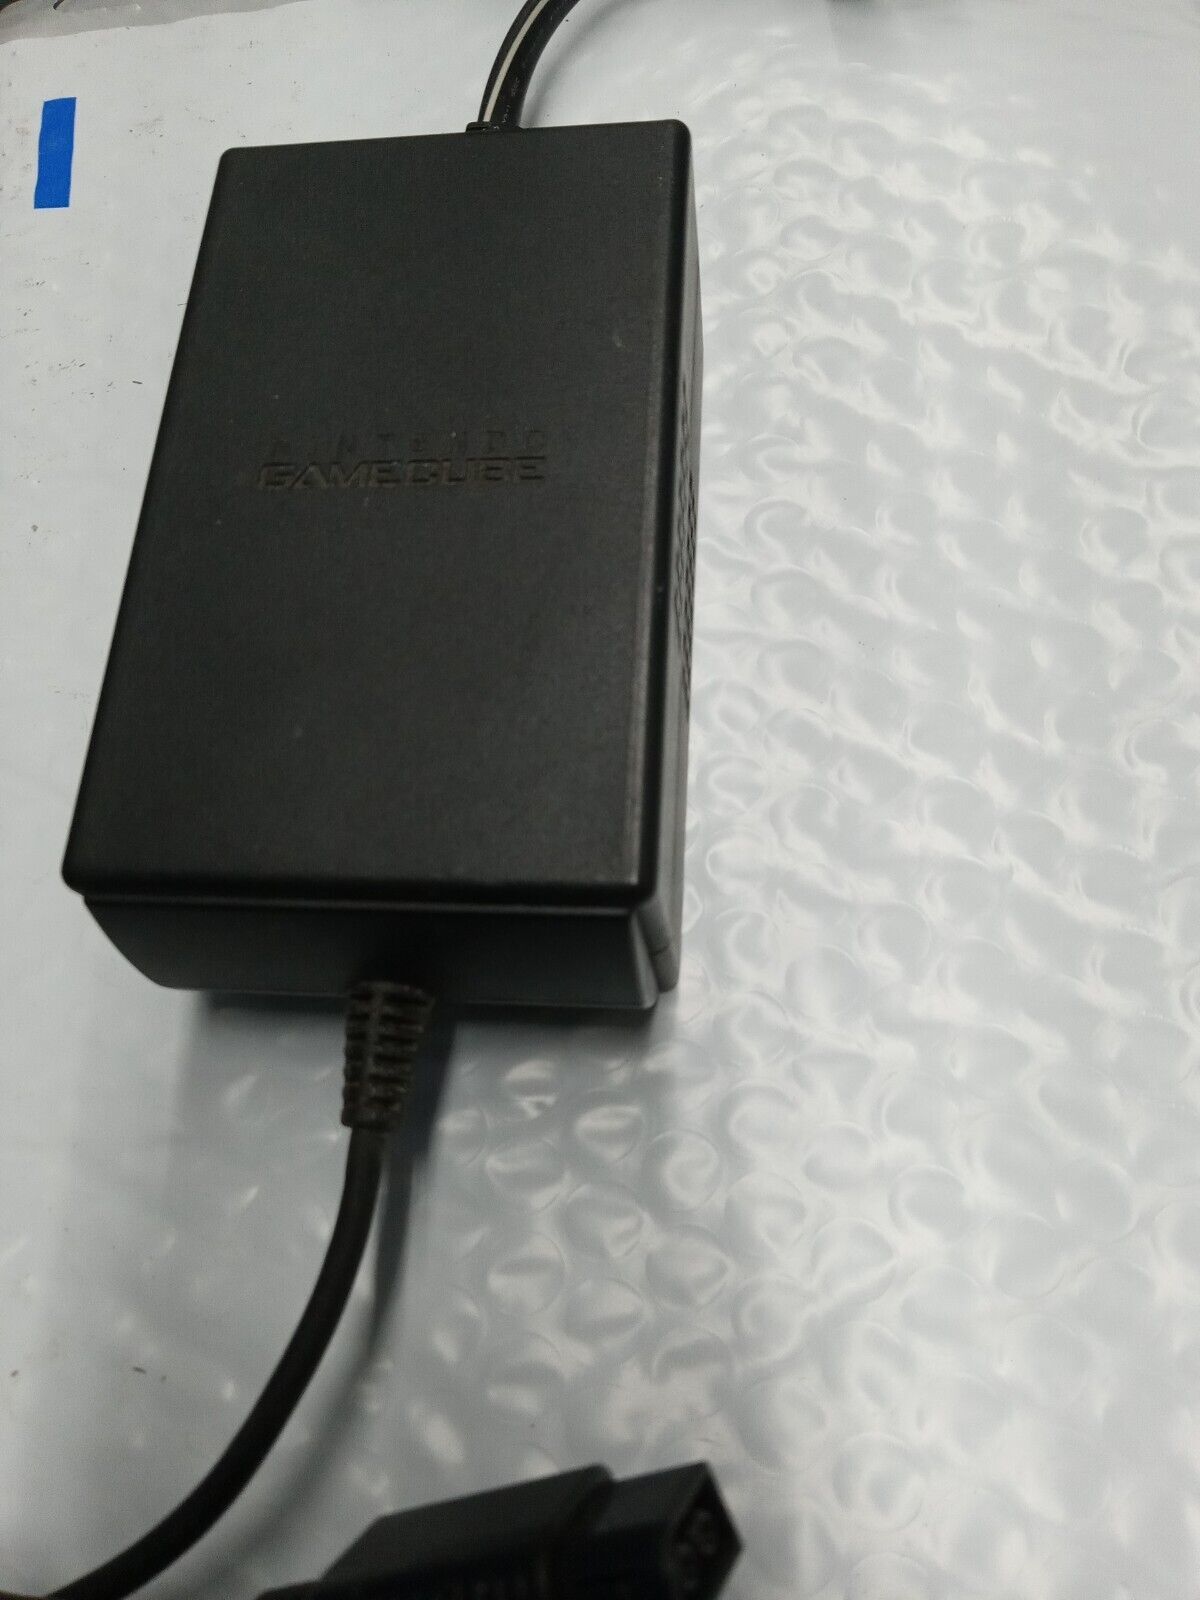 Primary image for Official OEM Gamecube AC Power Adapter Cable Supply (DOL-002) Tested